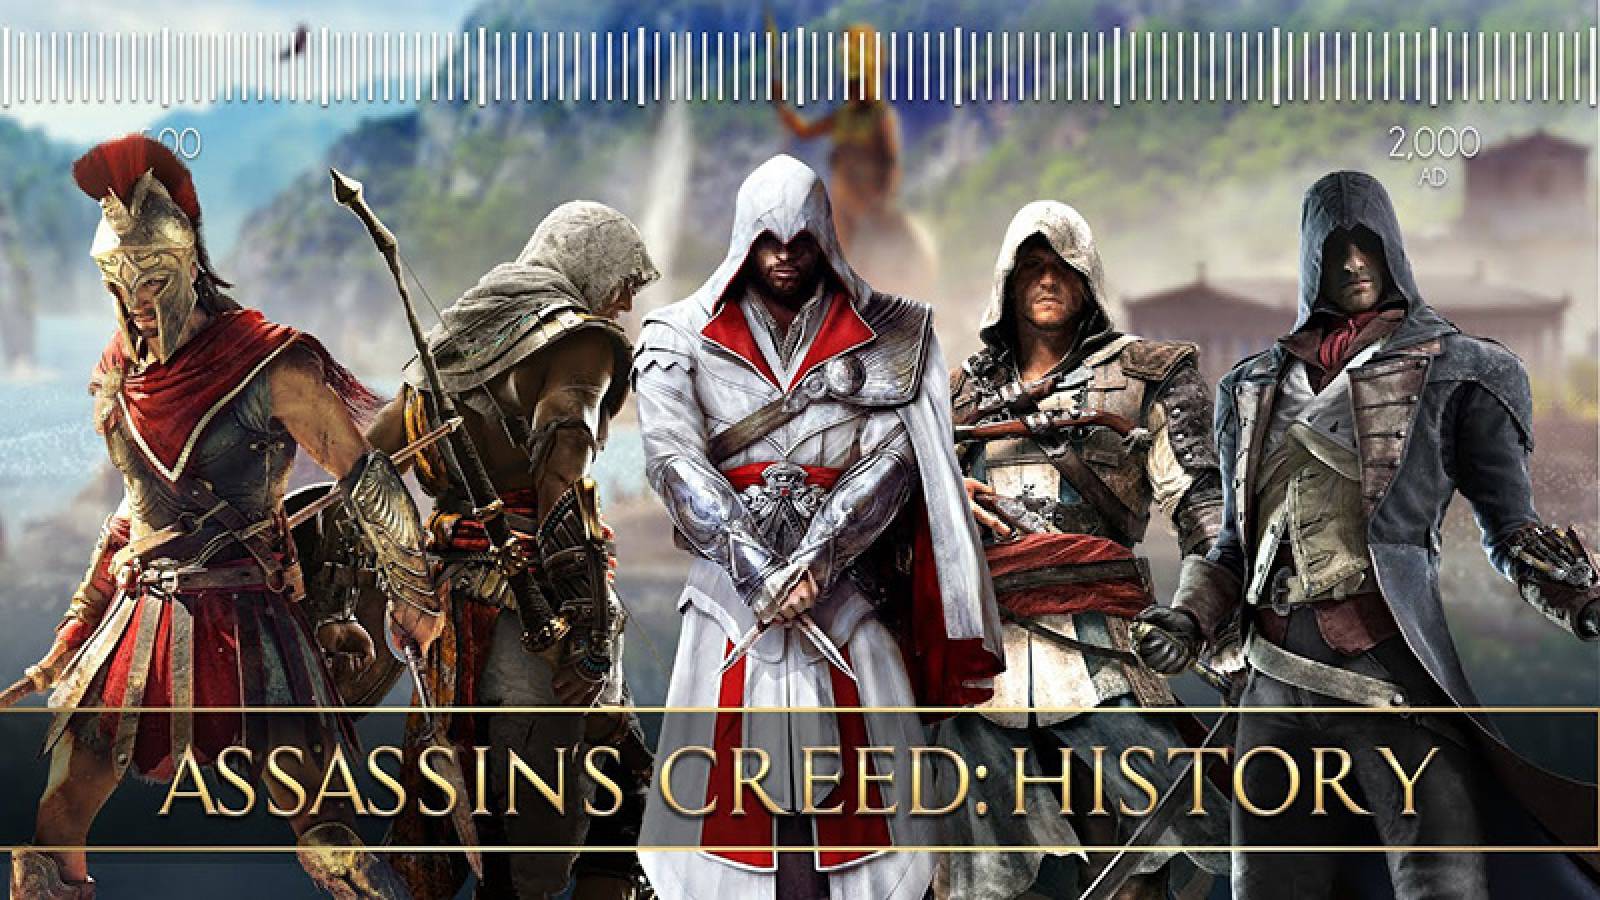 Games with the longest timeline: Assassin's Creed